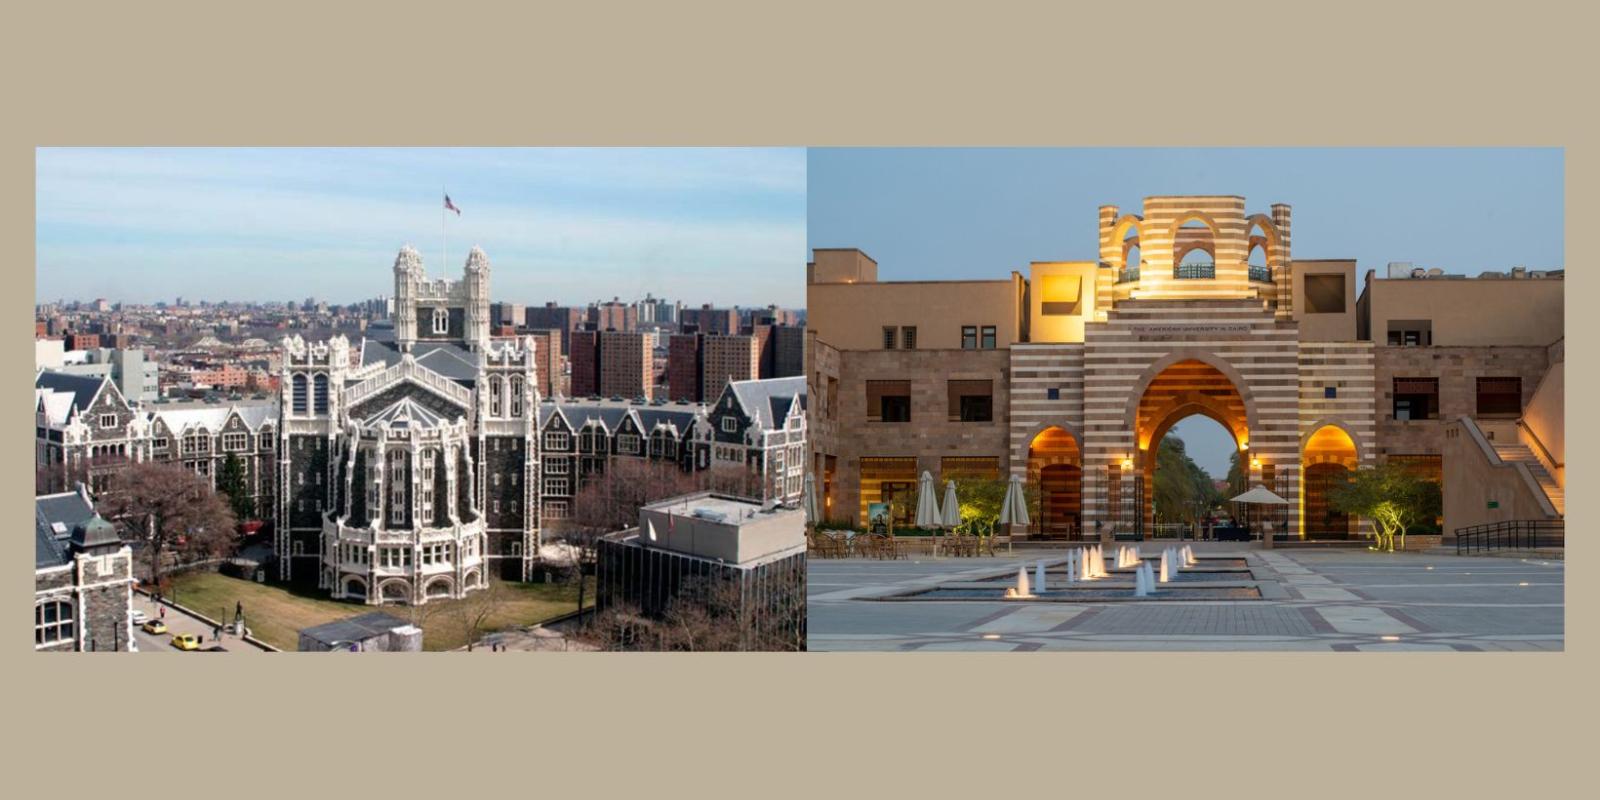 Photo of AUC and City University of New York Campuses